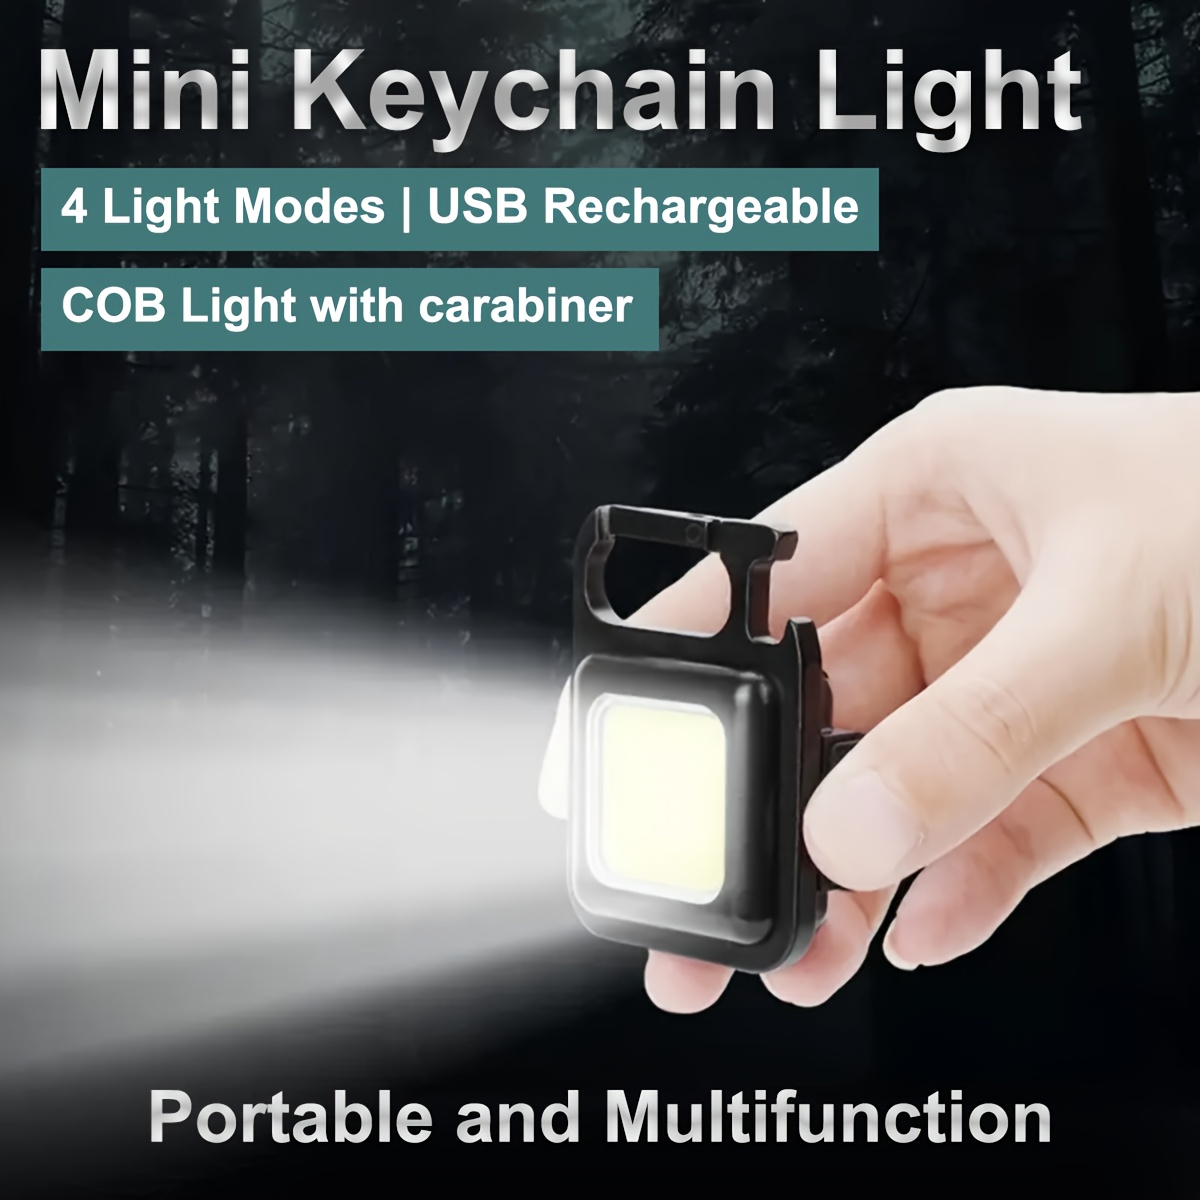 

Usb Rechargeable Mini Led Keychain Light With Carabiner - 4 Modes, Cob Portable Headlight For Camping, Hiking & Emergency Use (includes Battery)